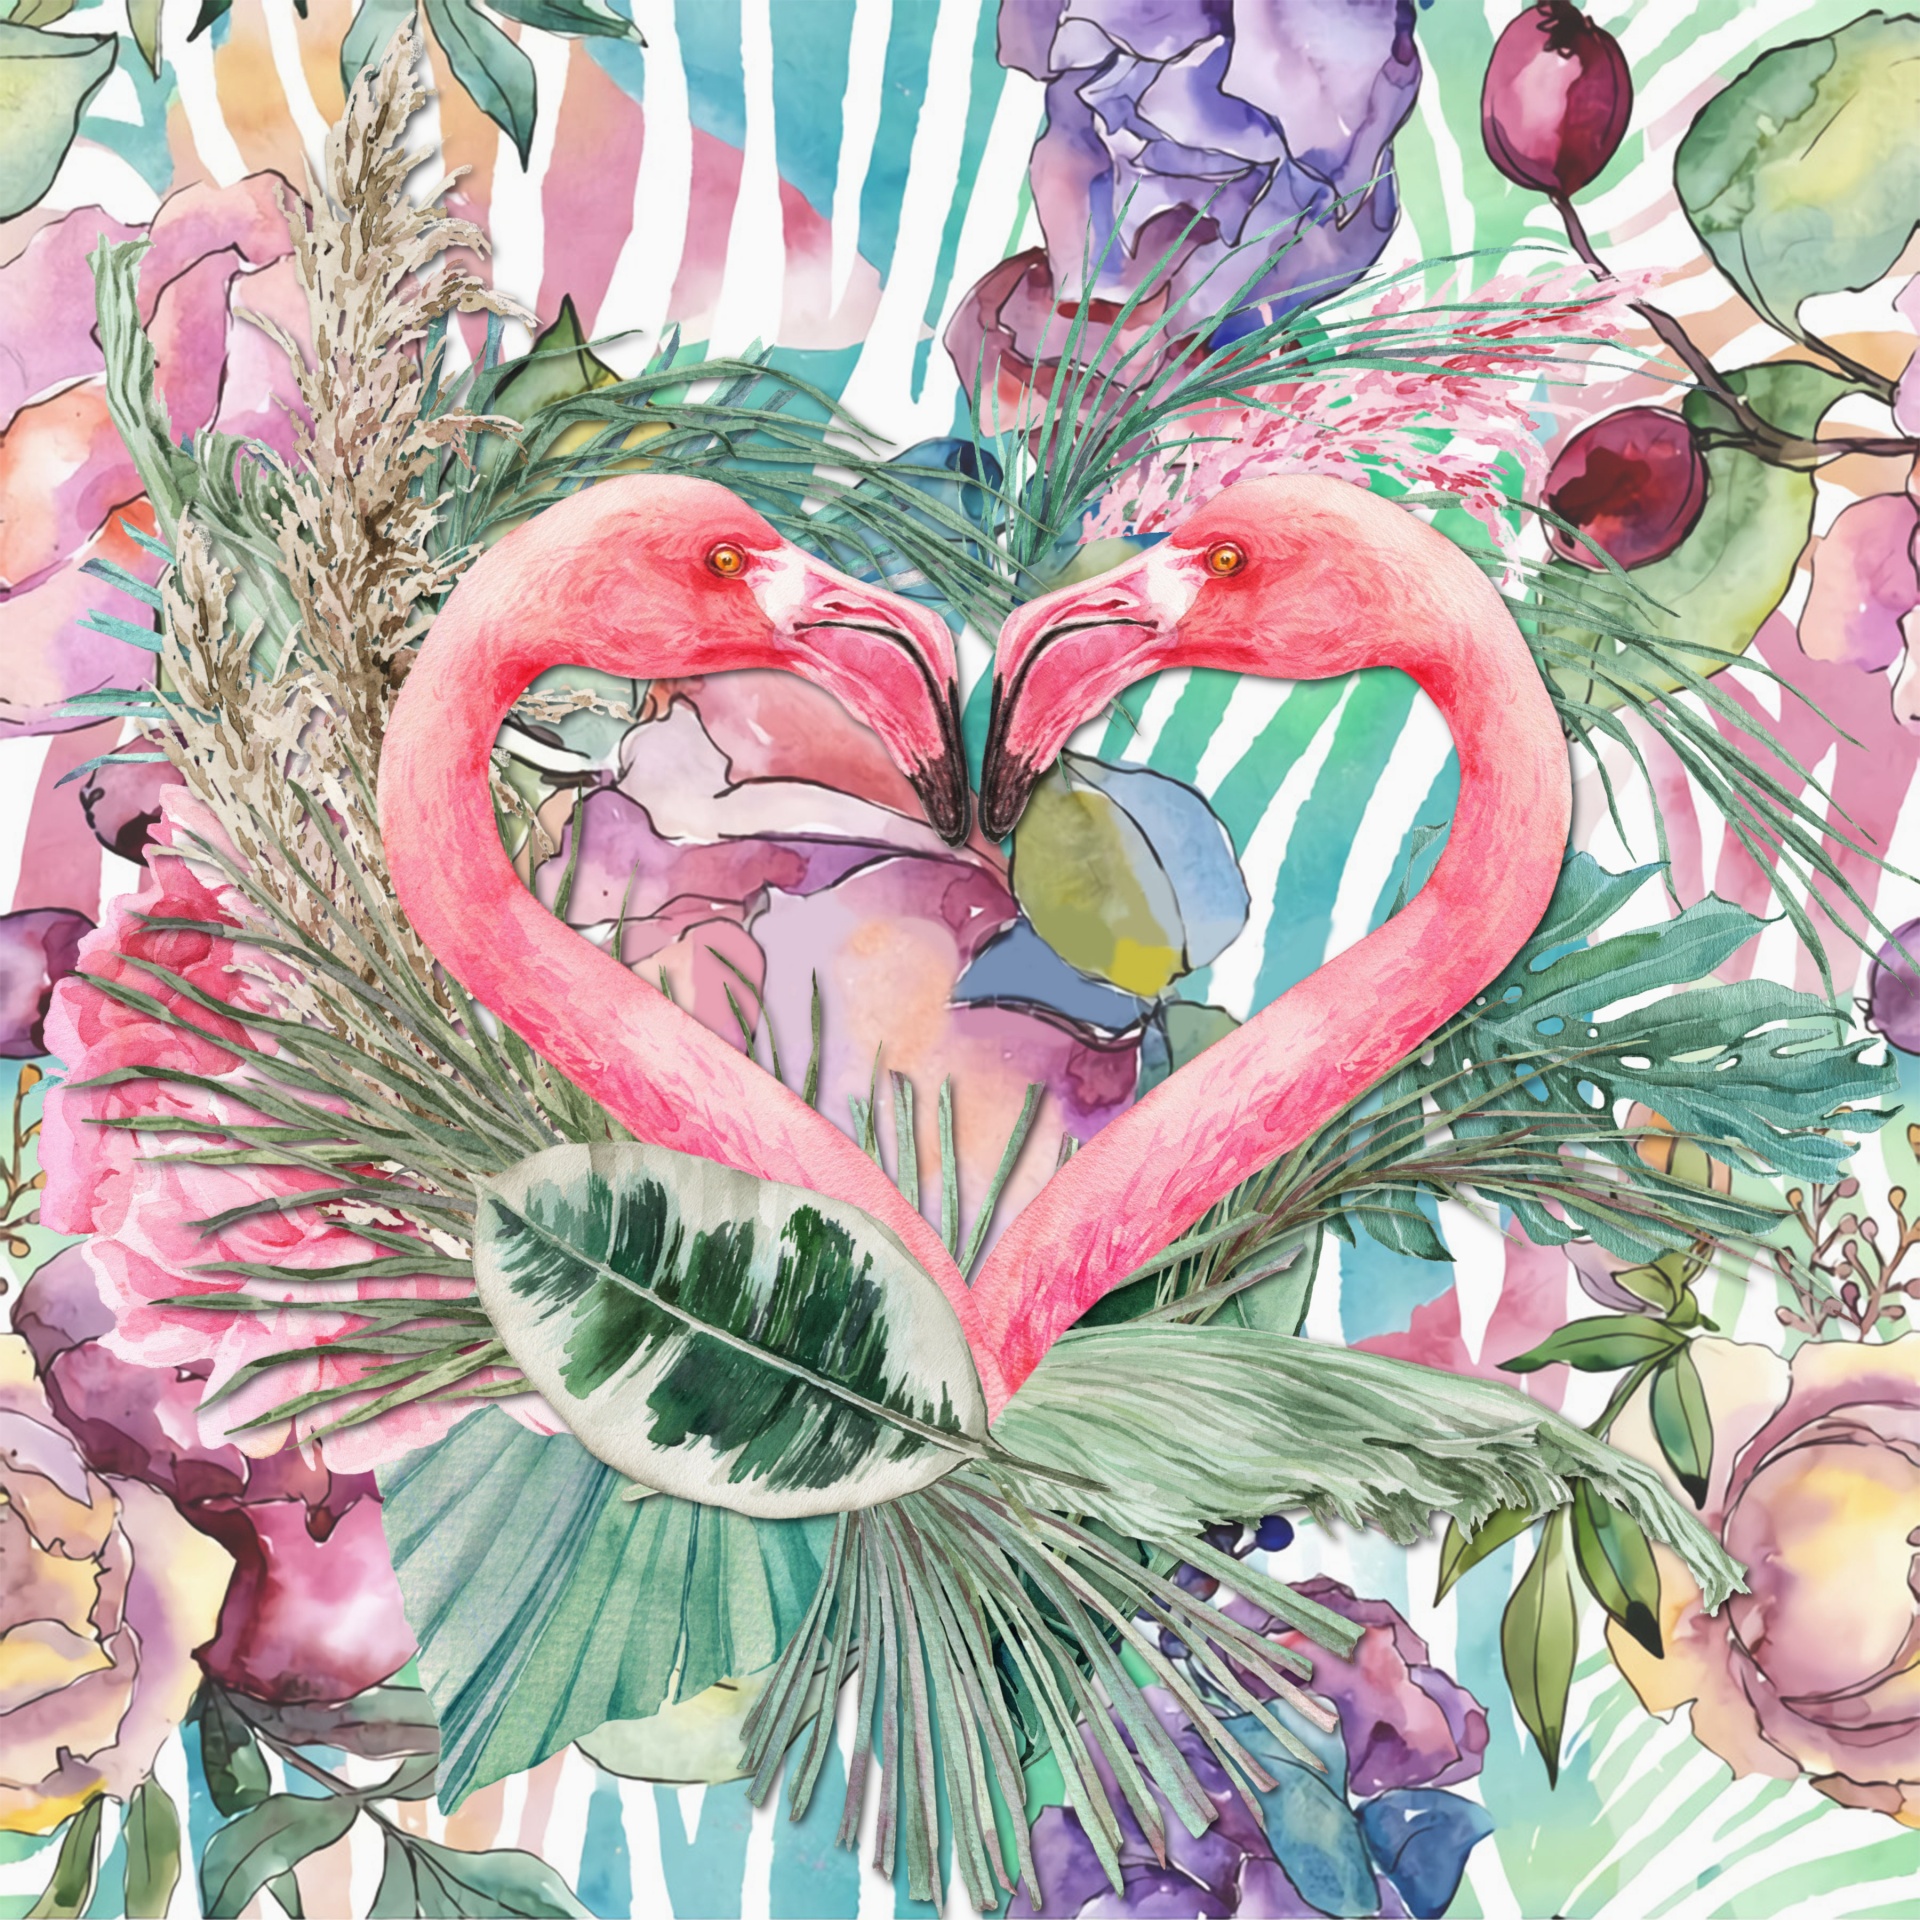 a heart formed by two flamingoes facing each other on a lush colorful watercolor background of tropical plants and flowers